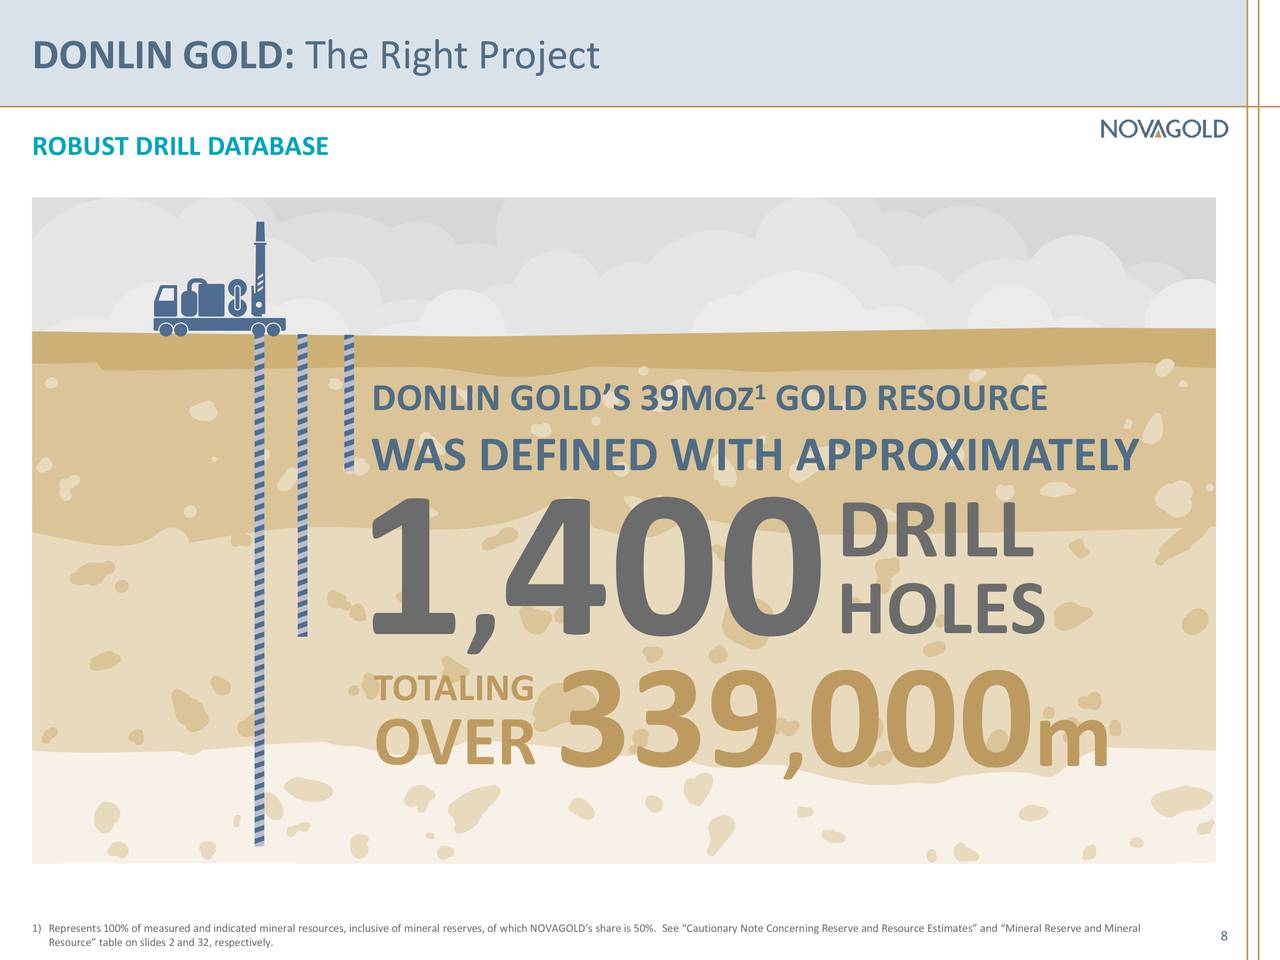 DONLIN GOLD: The Right Project